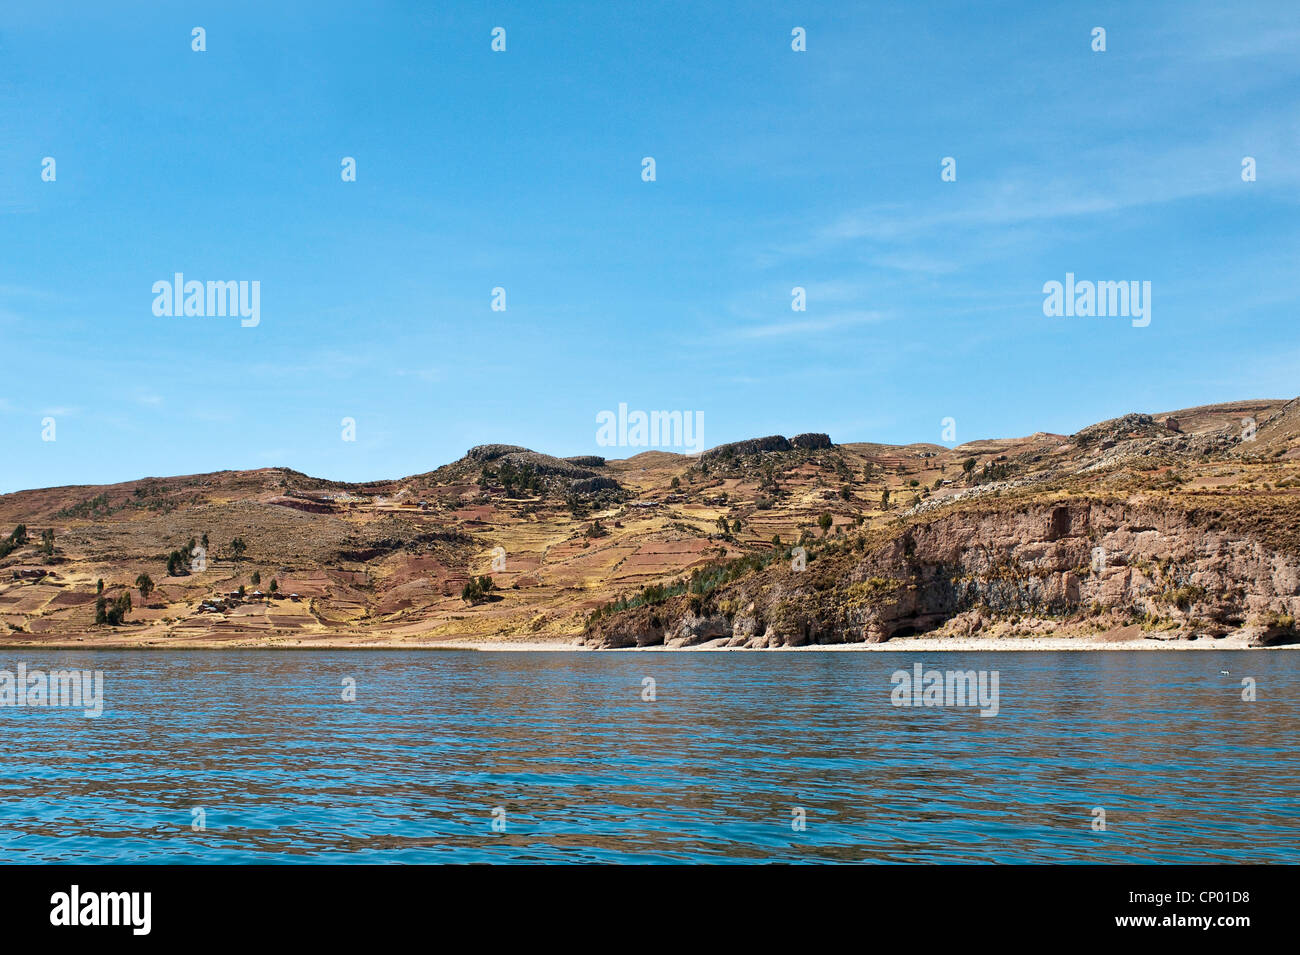 view from the water at the shore of Lake Titicaca, Peru, Taquile Island, Lake Titicaca Stock Photo